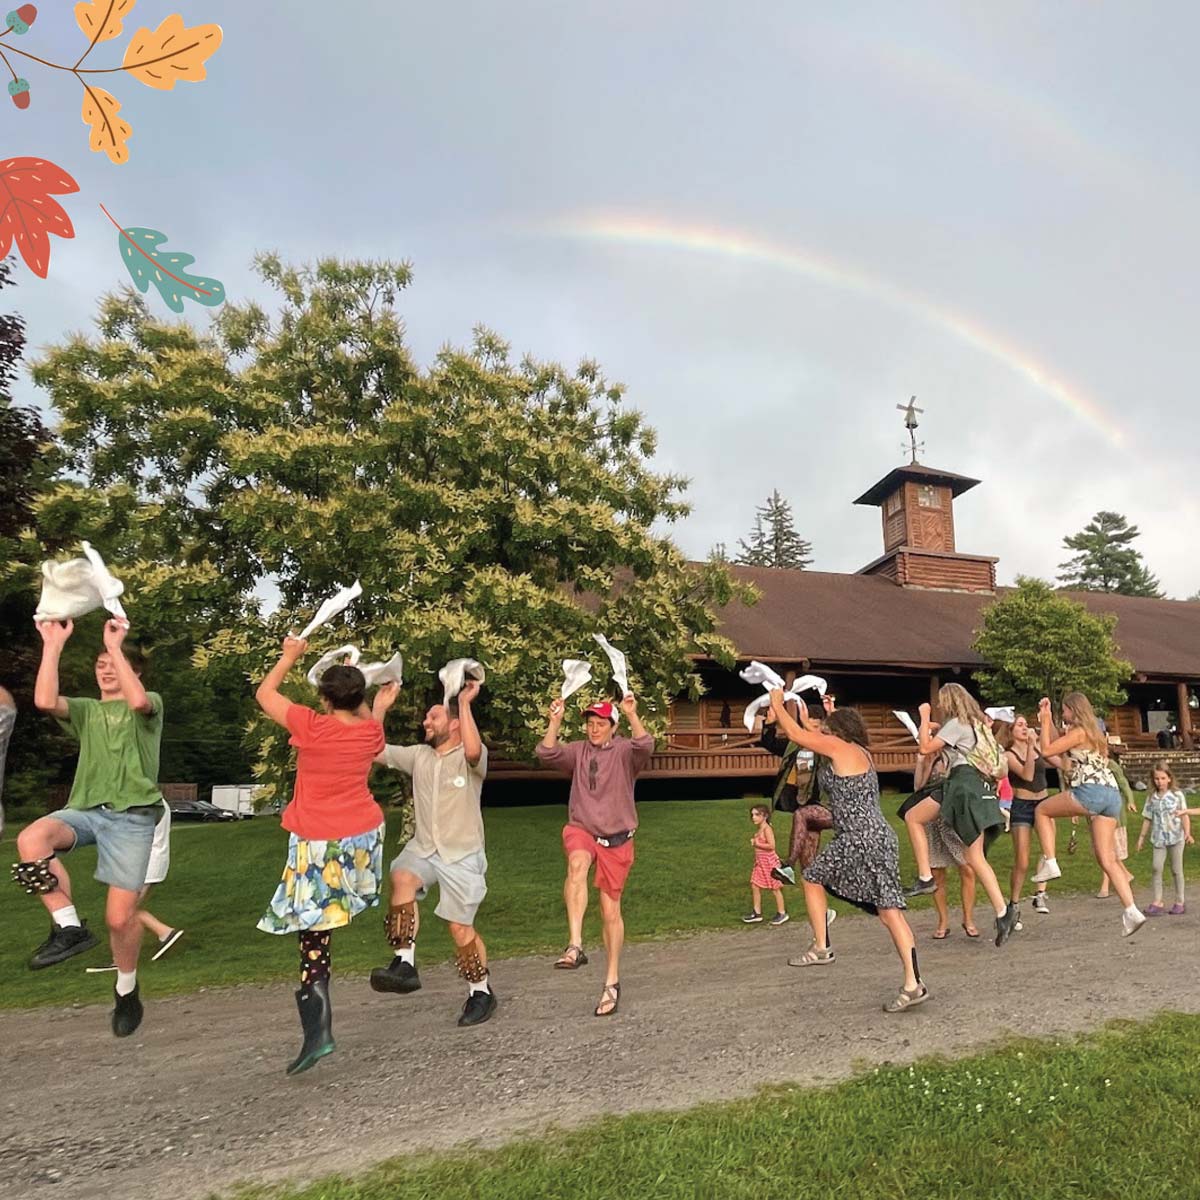 Dancers under a rainbow at CDSS's Family Week at Agassiz Village. Photo by Hamish Swanson.